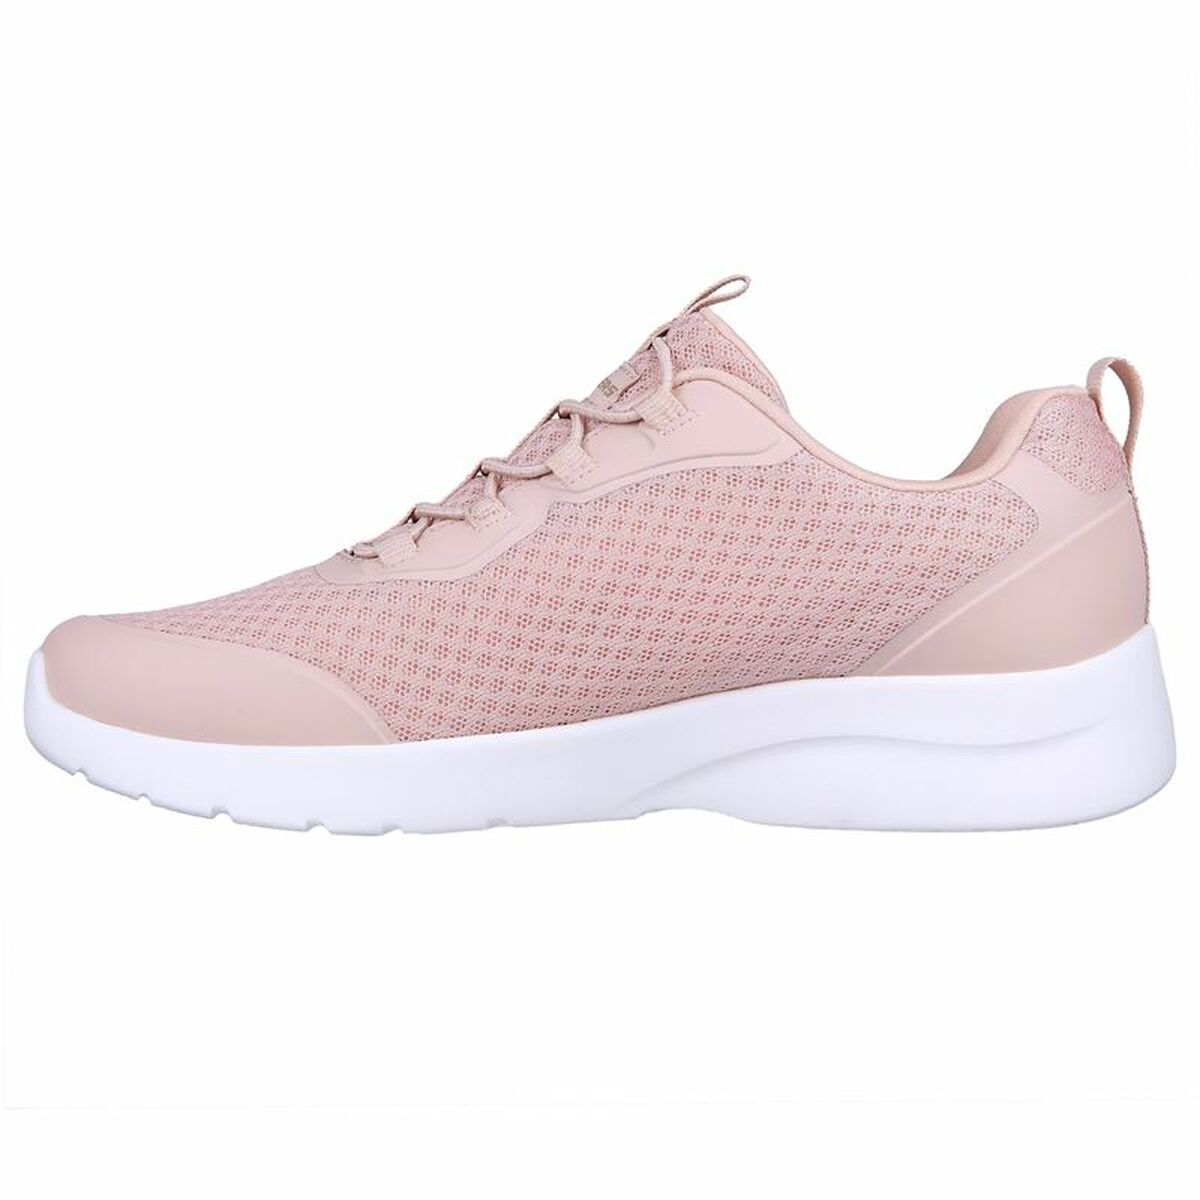 Sports Trainers for Women Skechers Dynamight 2.0 Light Pink